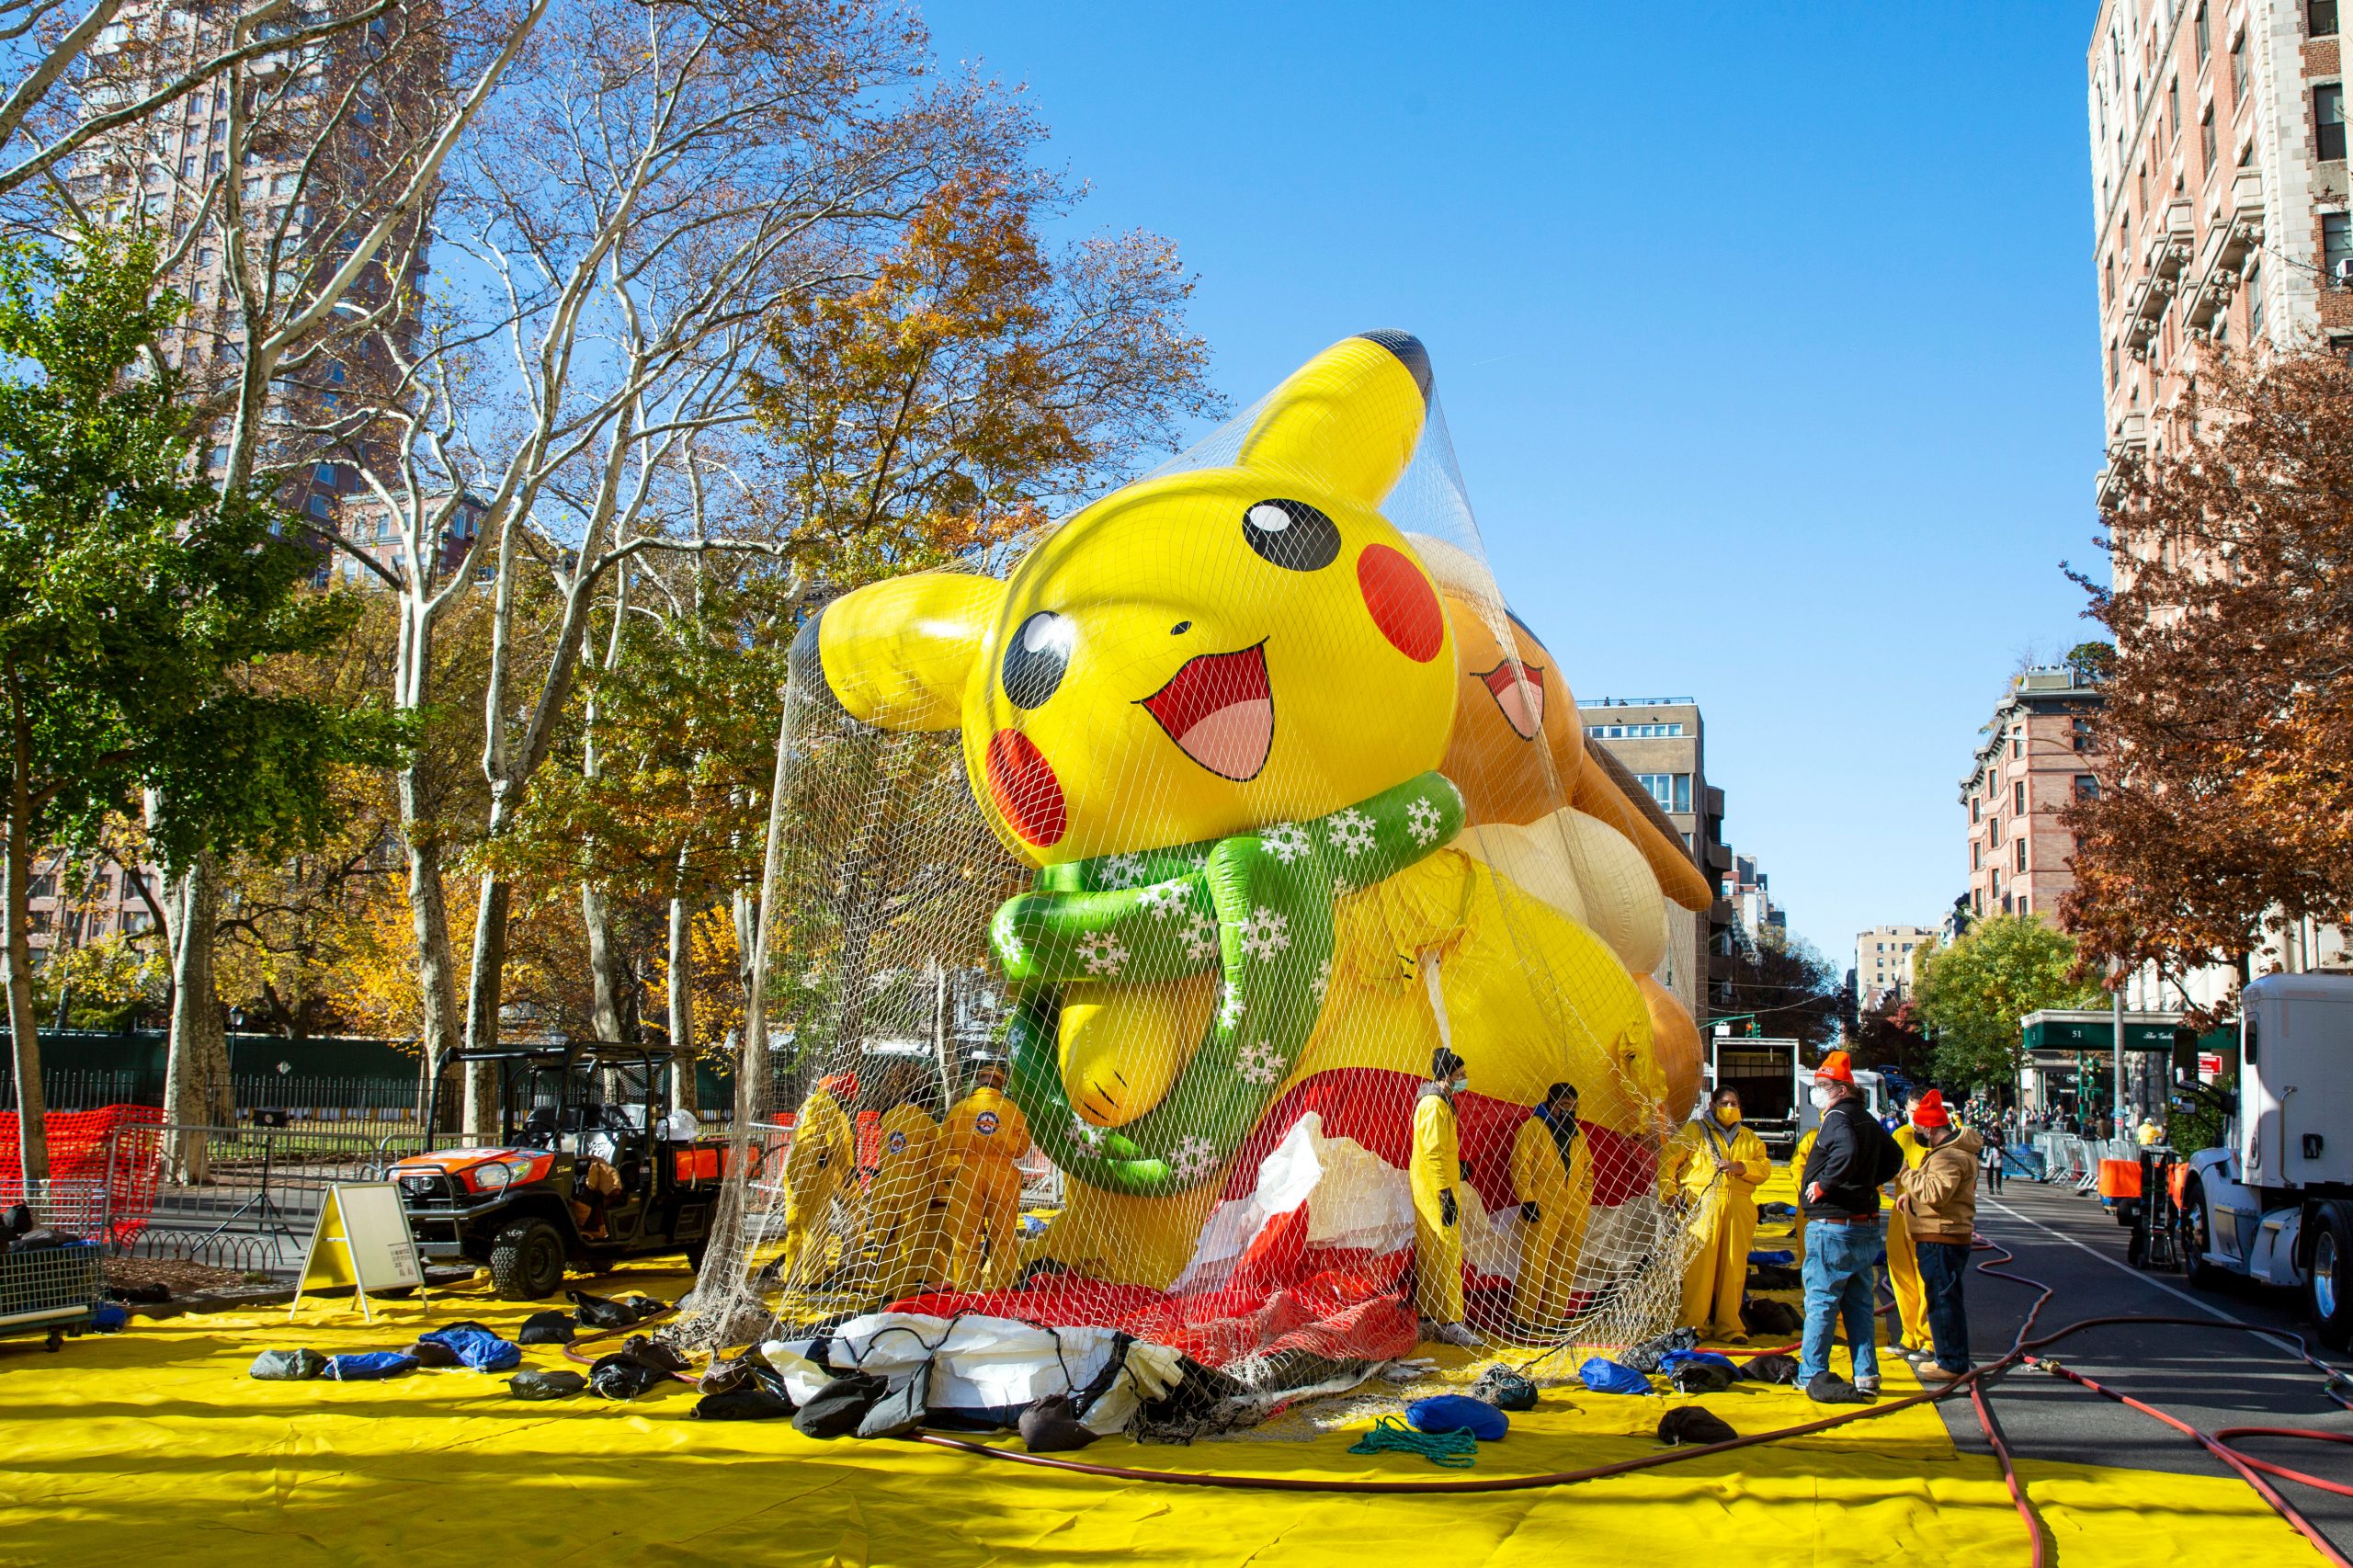 Macy’s Thanksgiving parade returns, with all the trimmings